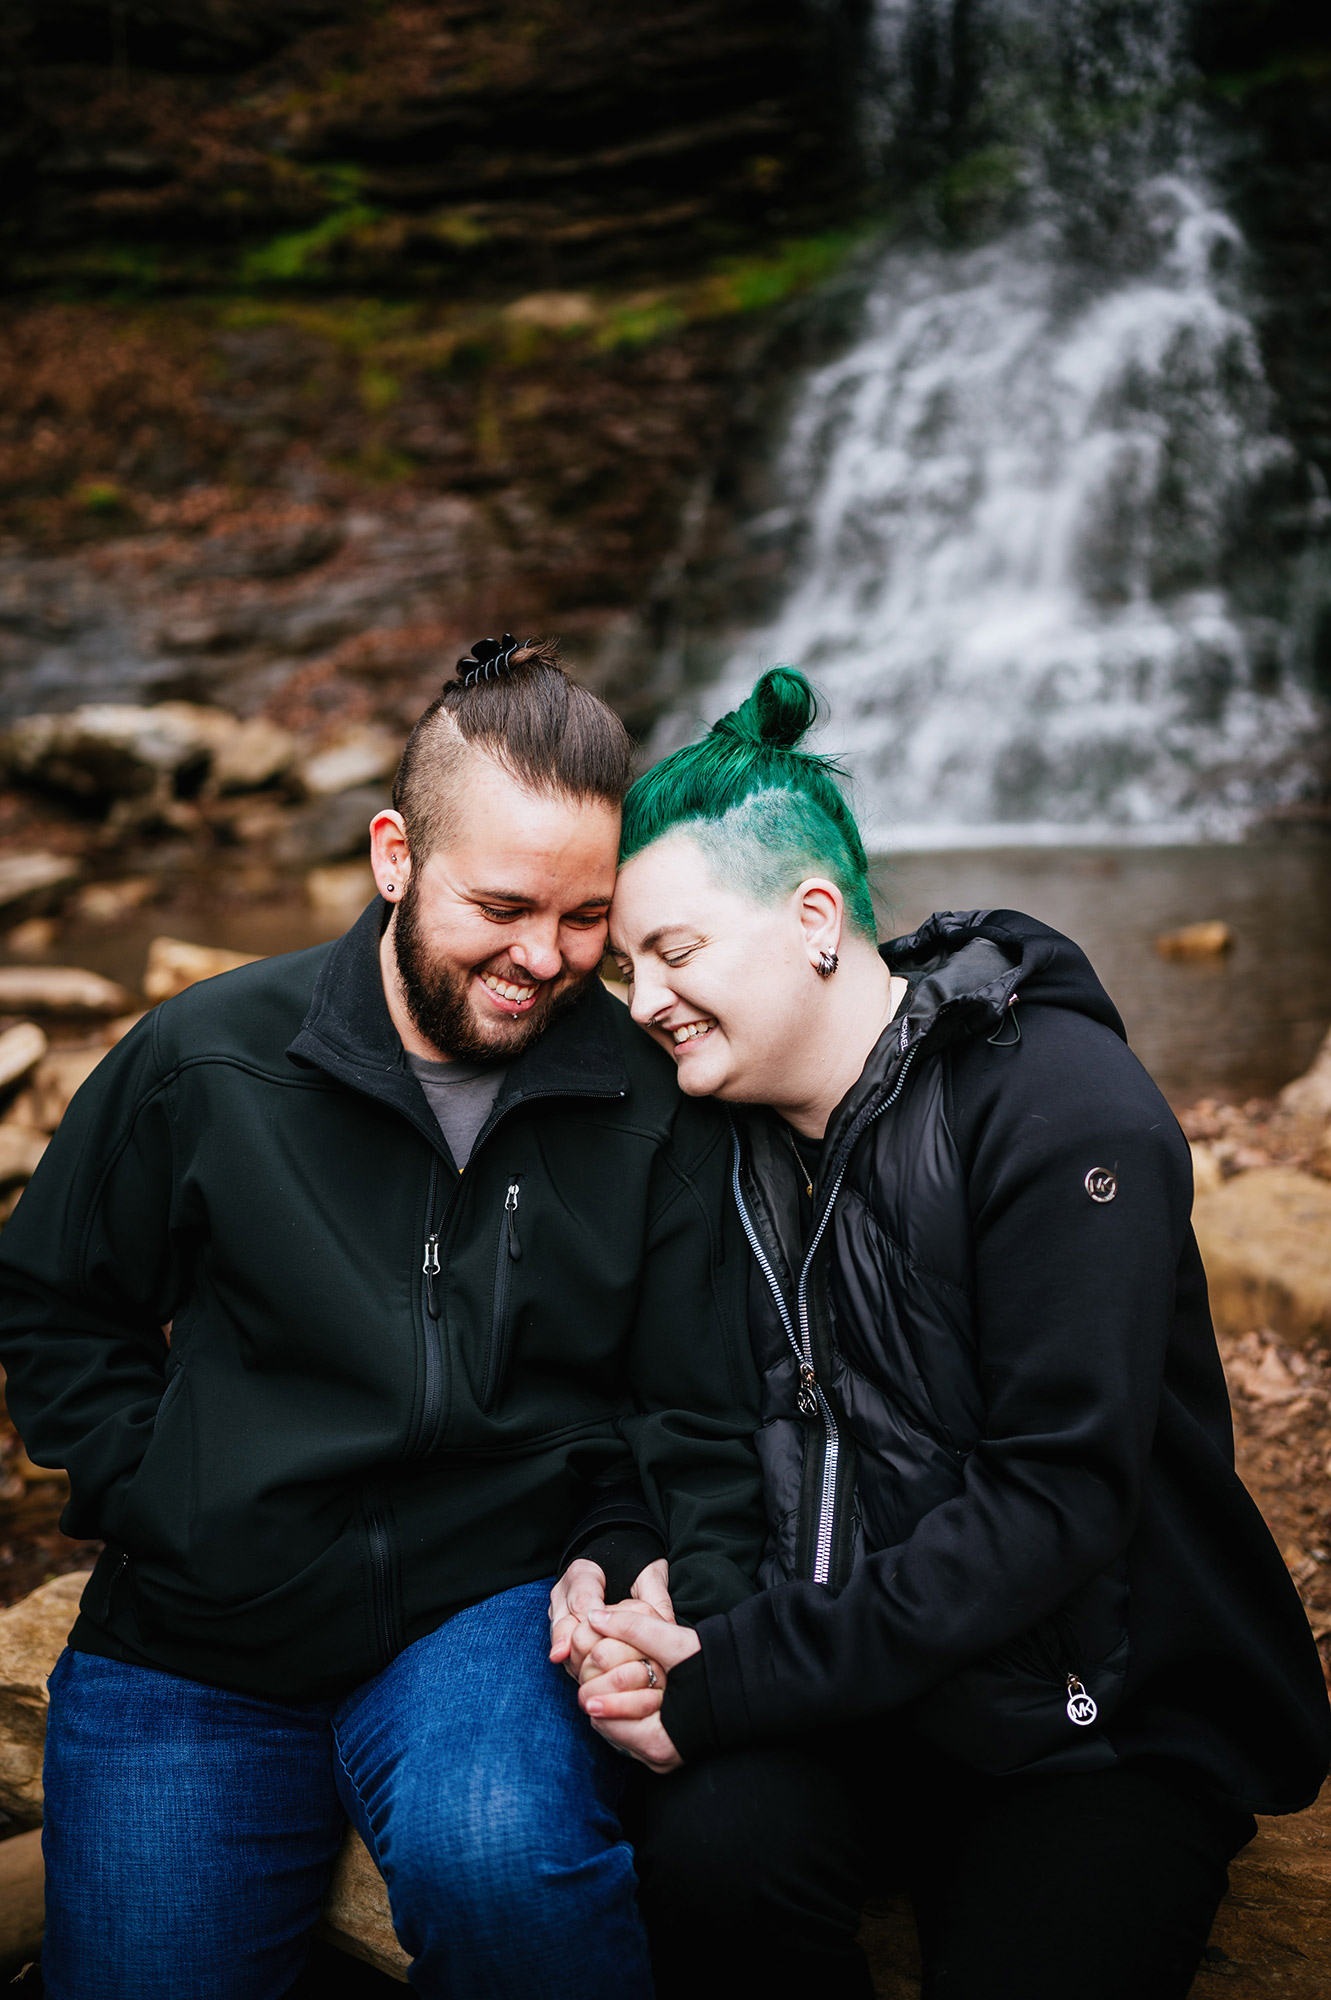 A couple sits closely together, holding hands and smiling by a waterfall.